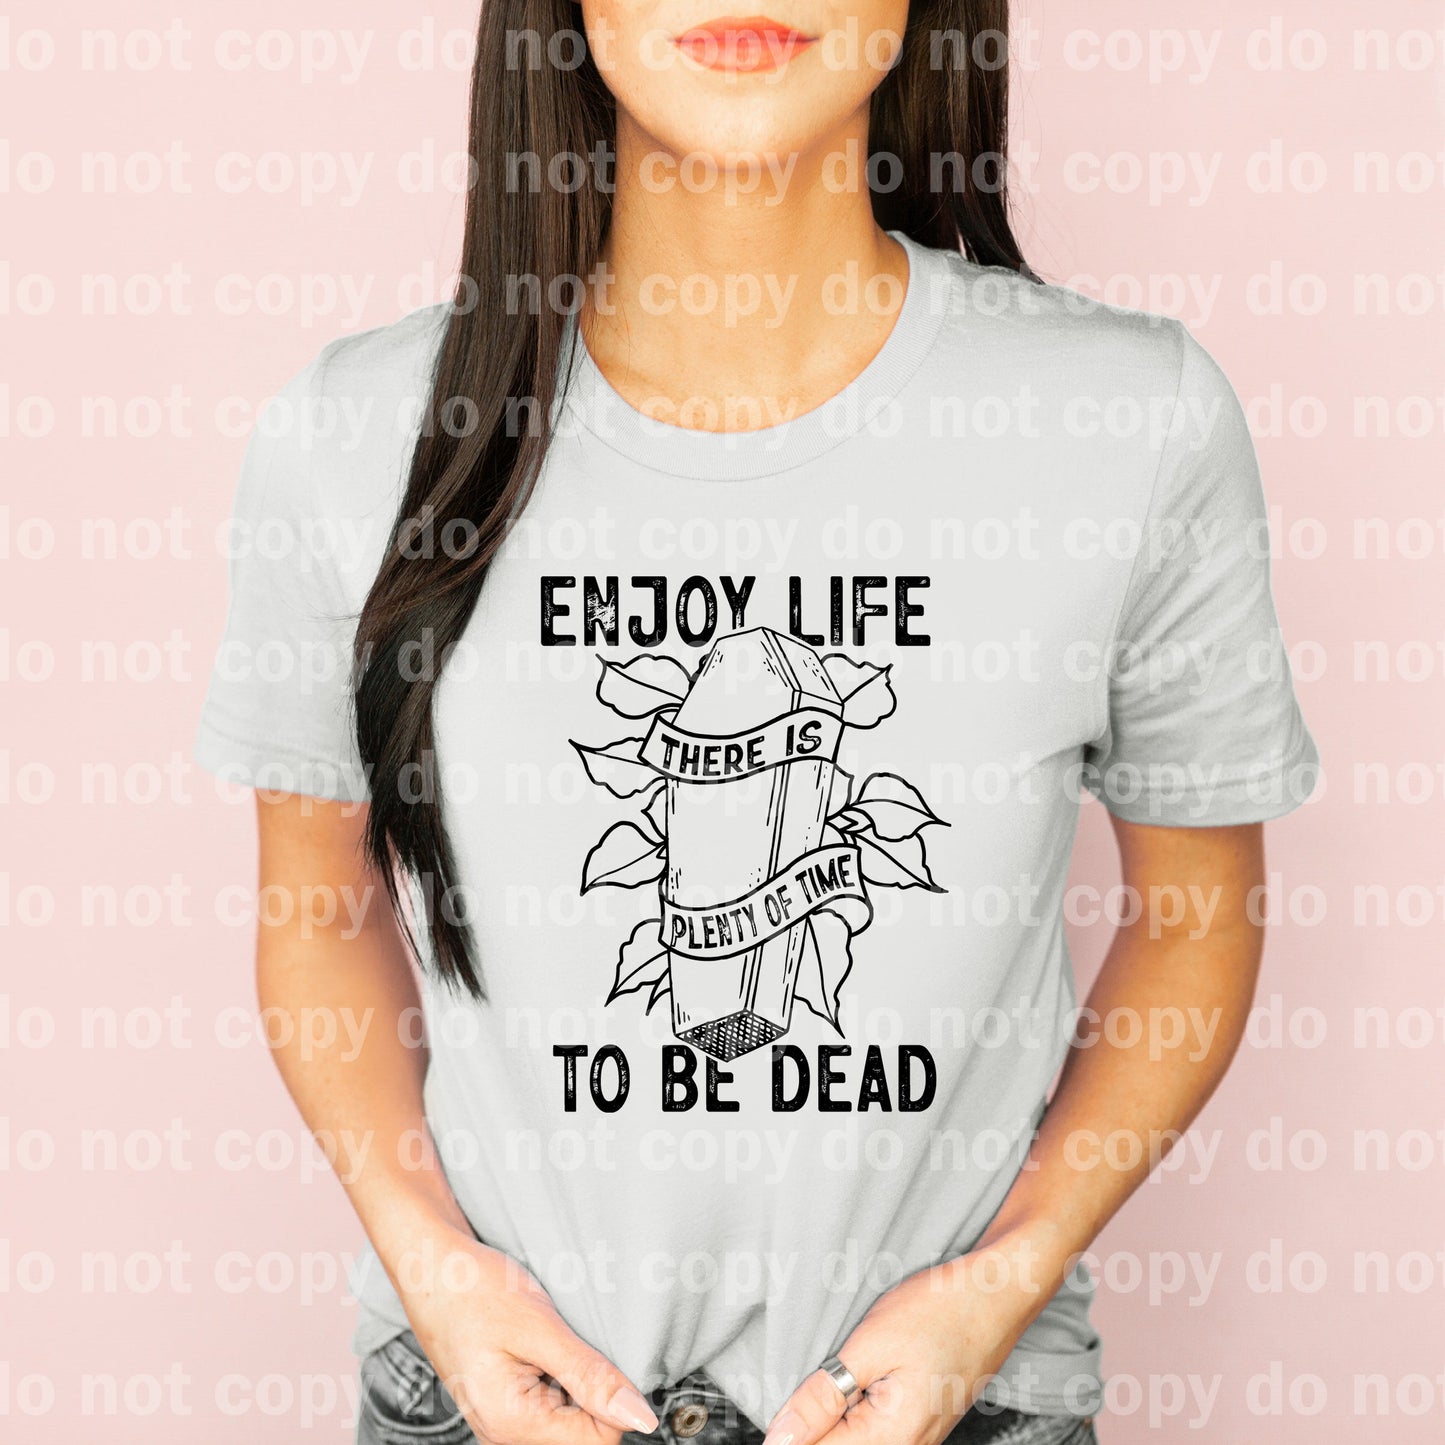 Enjoy Life There Is Plenty Of Time To Be Dead Full Color/One Color Dream Print or Sublimation Print